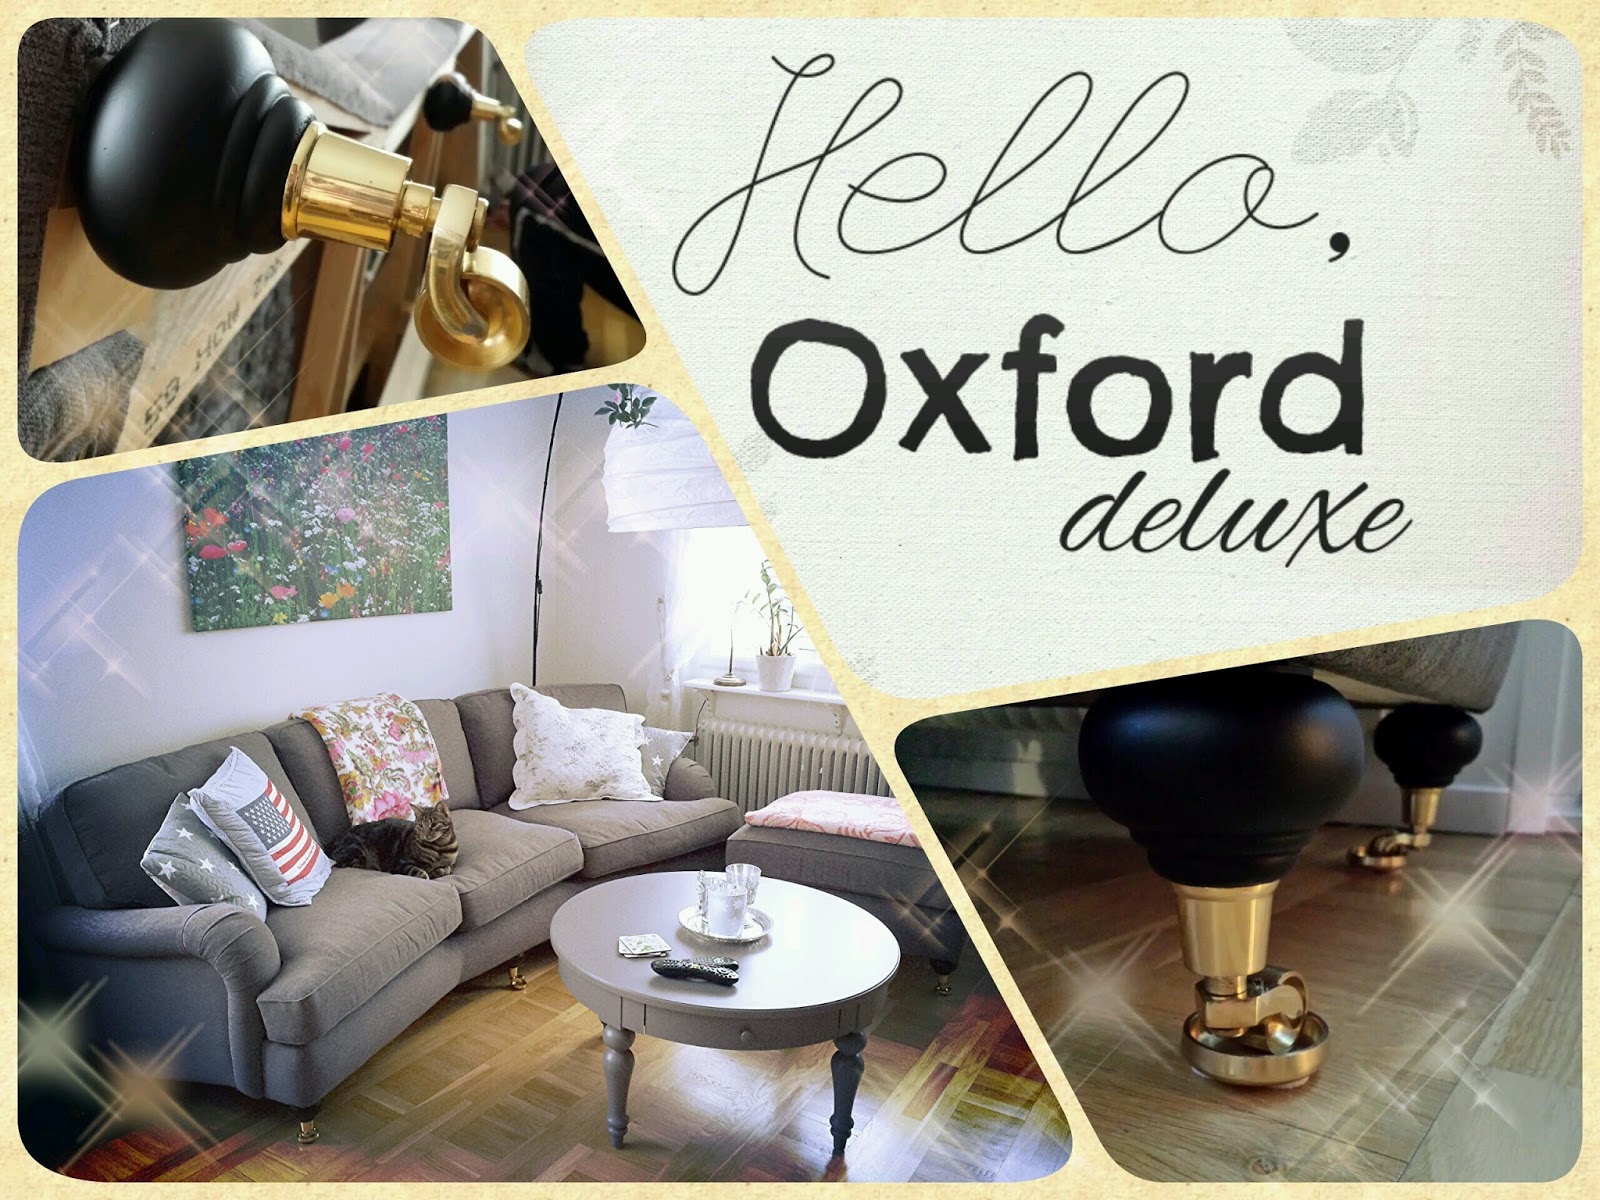 mio, howard, soffa, couch, oxford delux, black and gold, svart och guld